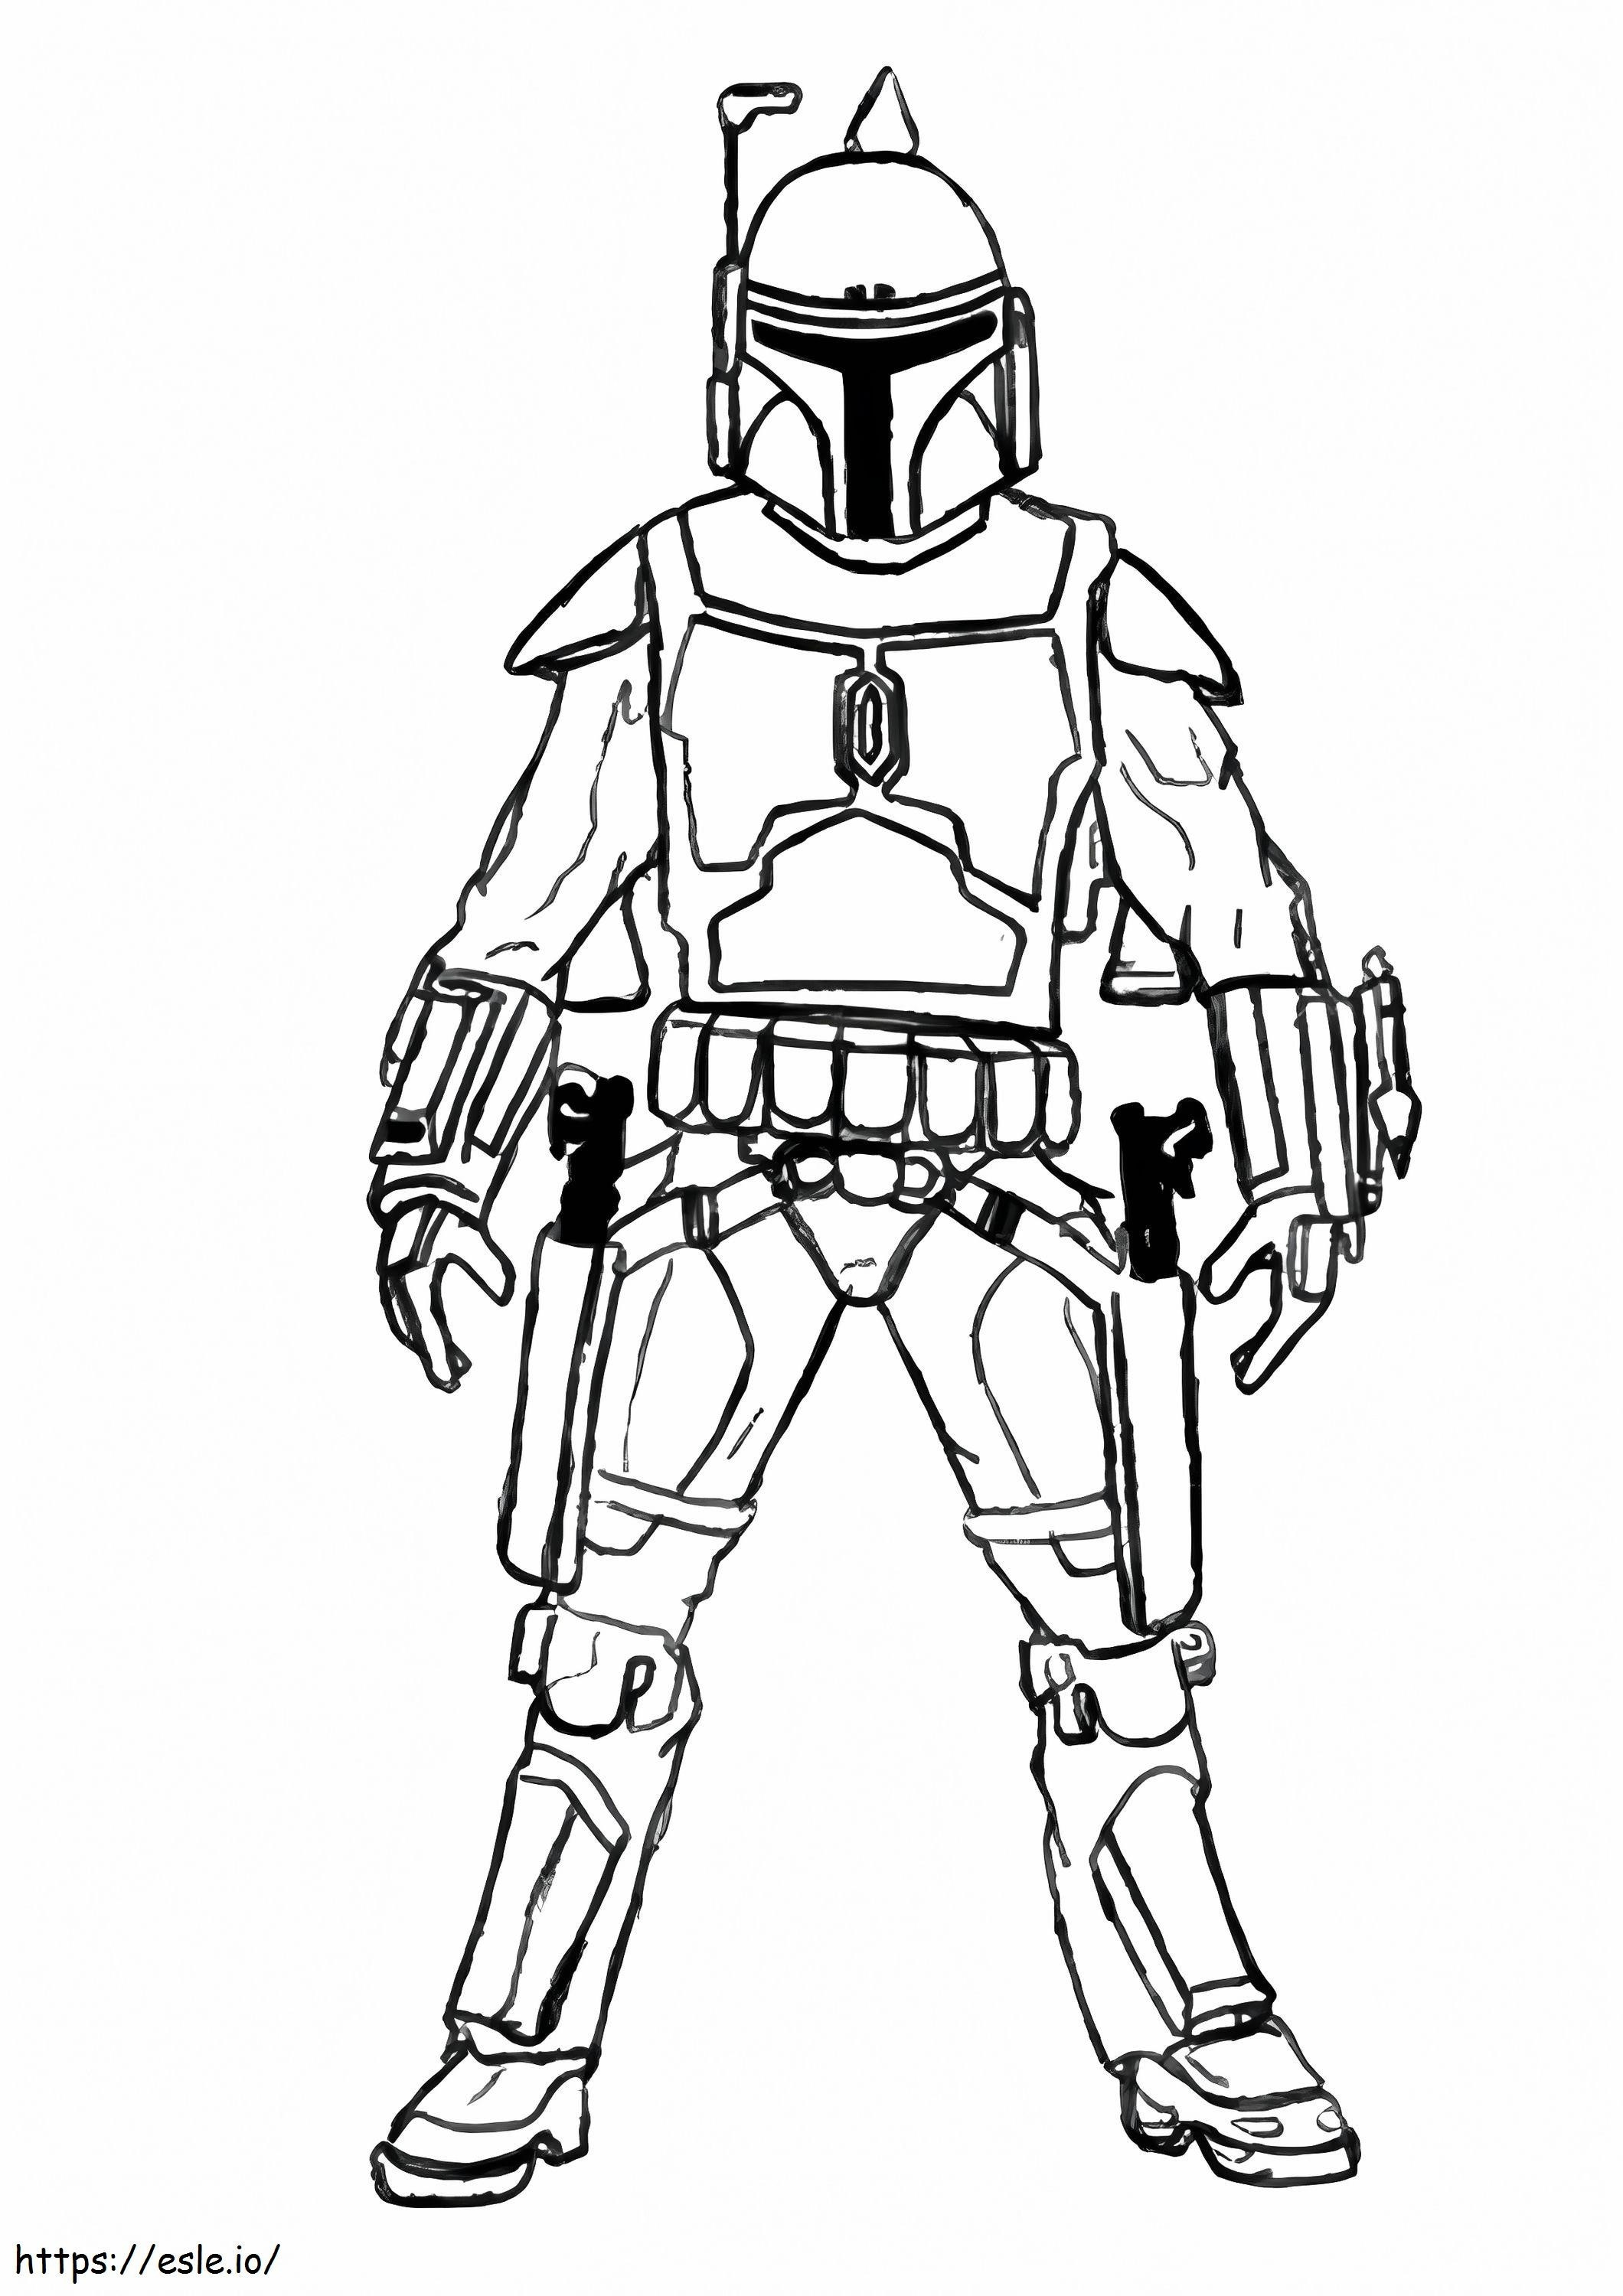 1526636804 The Boba Fett A4 coloring page